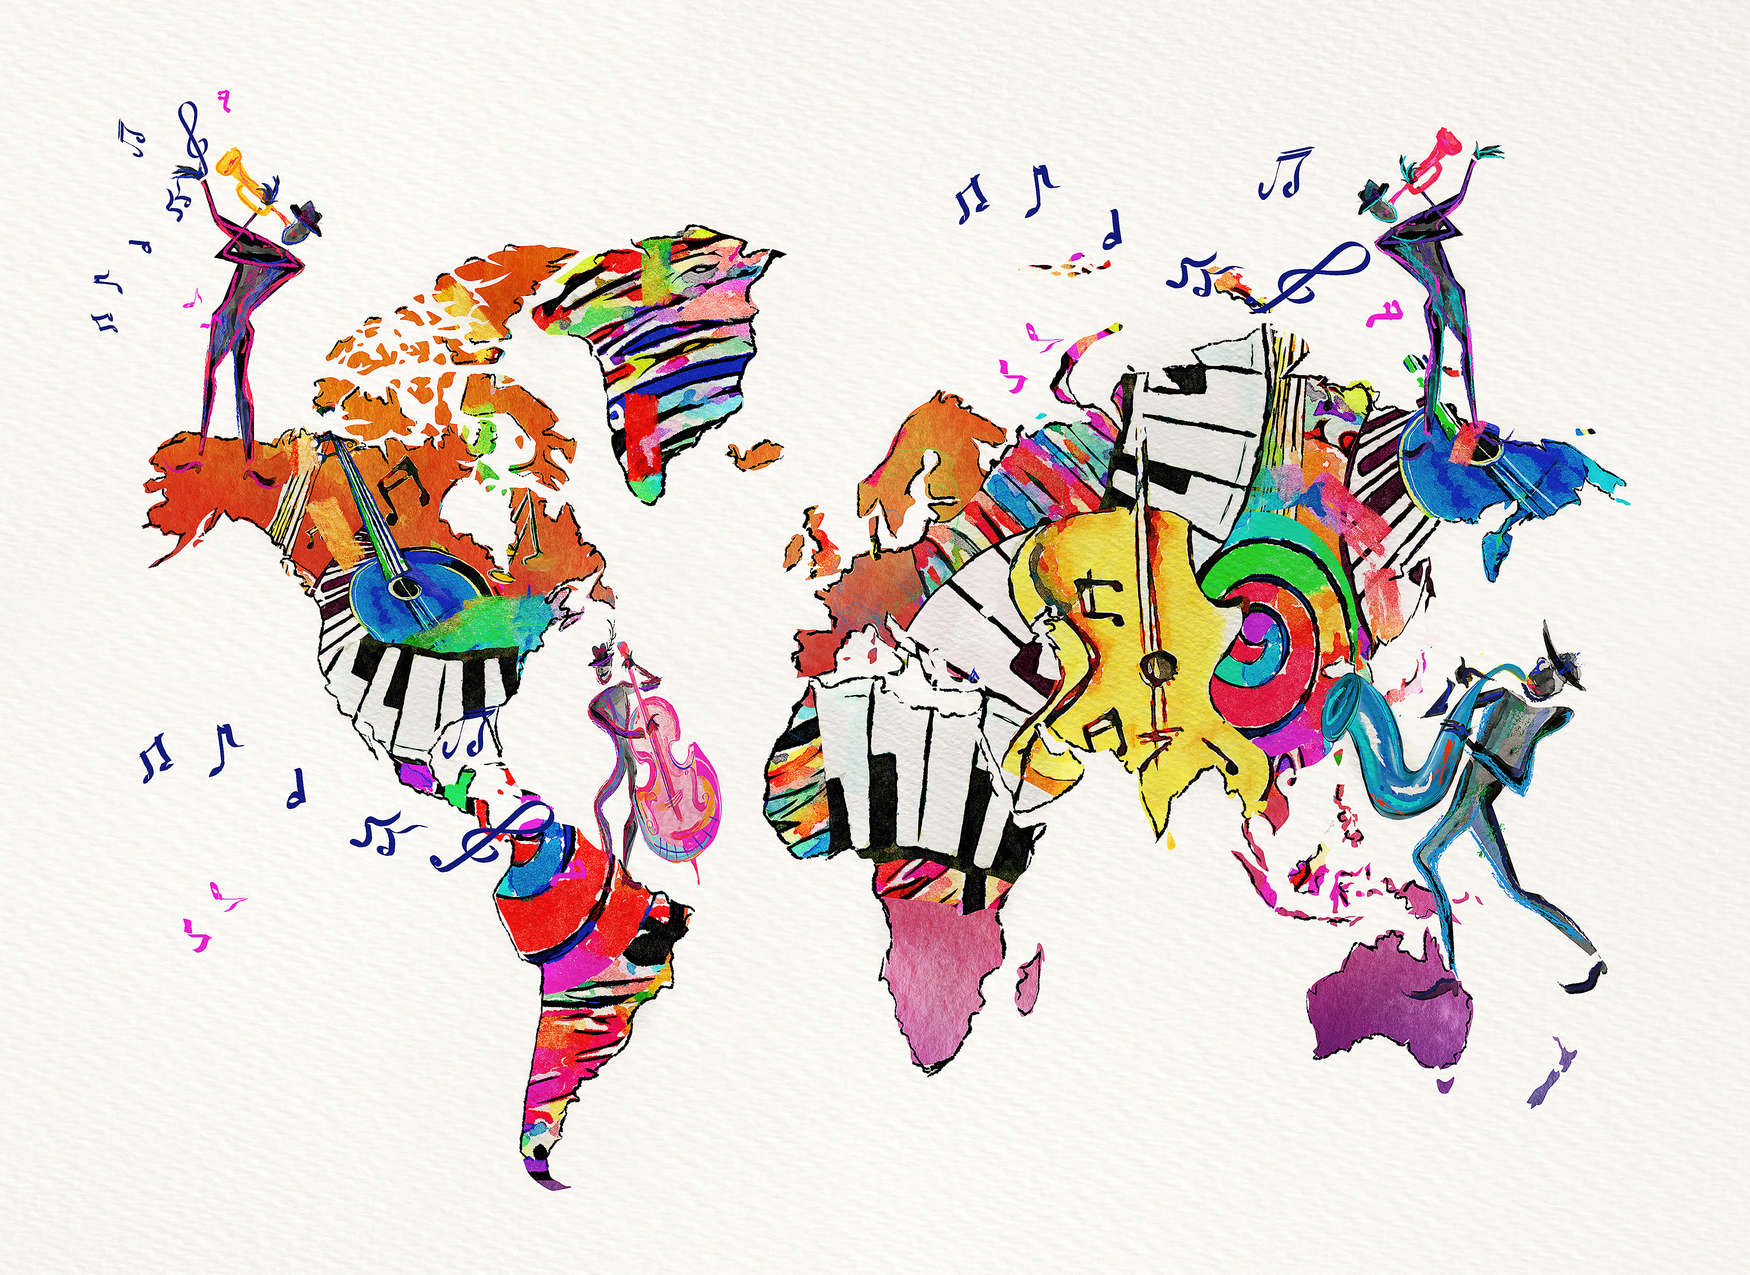             World Map Wallpaper Filled with Instruments and Clefs - Colourful, White
        